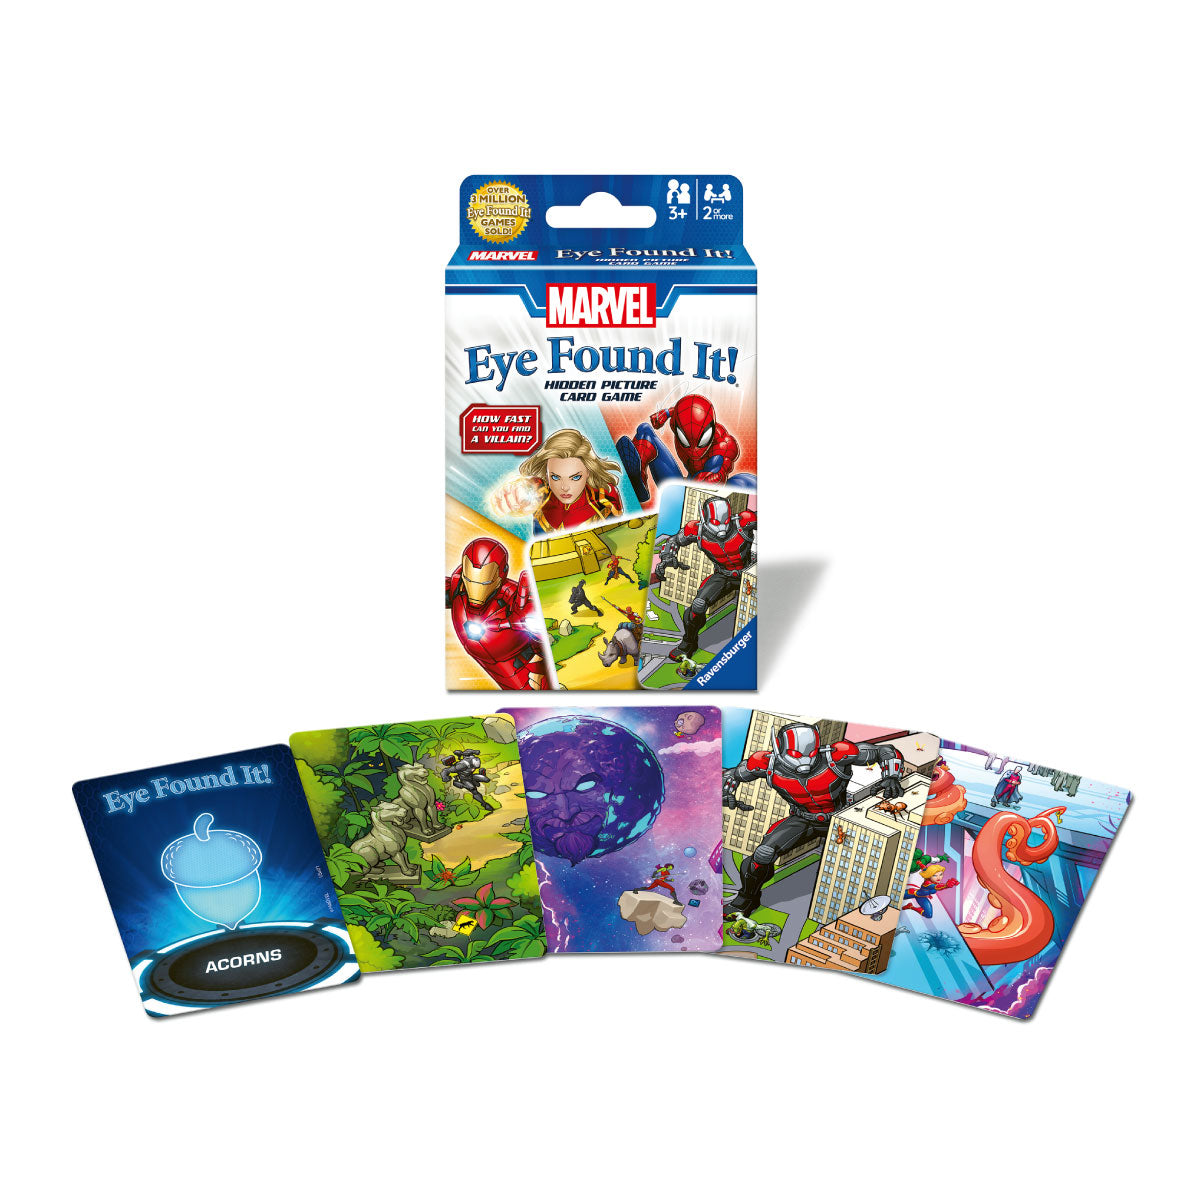 Marvel Eye Found It! Card Game from Ravensburger